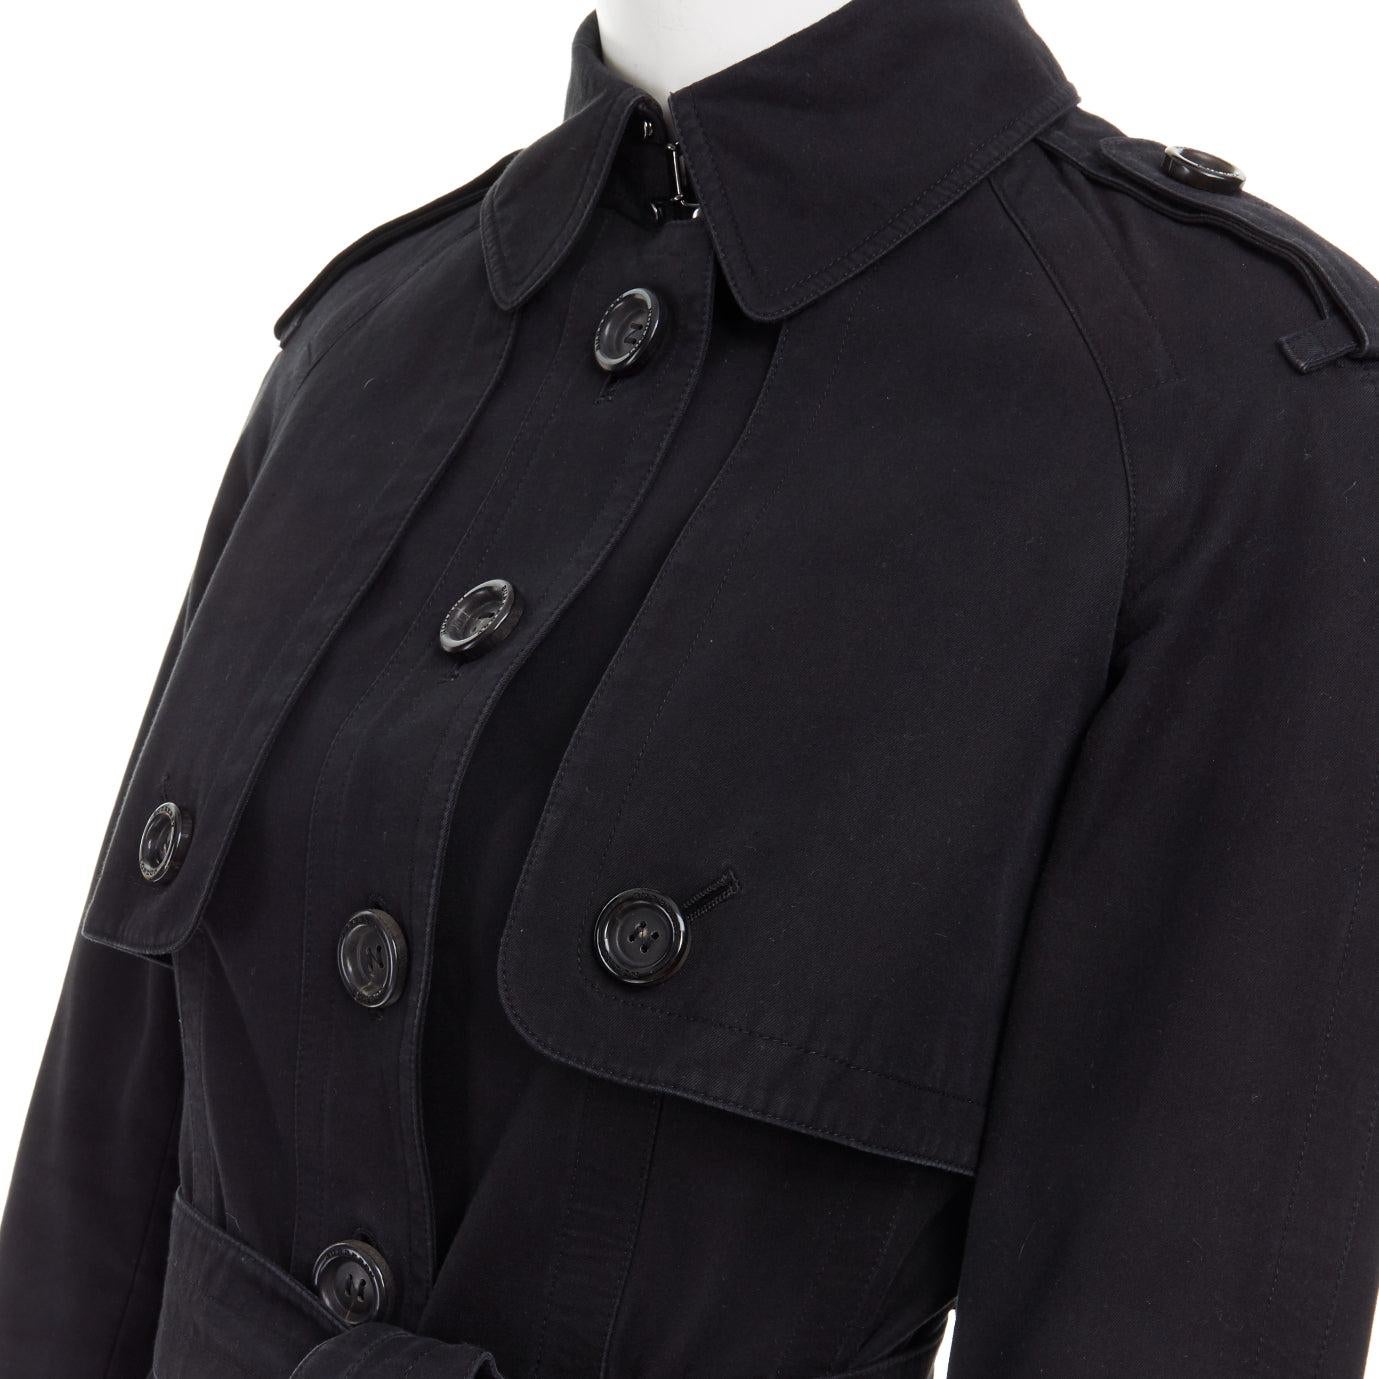 BURBERRY black cotton house check lined button front mid length trench coat S
Reference: TGAS/A03004
Brand: Burberry
Designer: Christopher Bailey
Material: Cotton
Color: Black
Pattern: Solid
Closure: Buckle
Extra Details: 100% cotton. Black. Spread